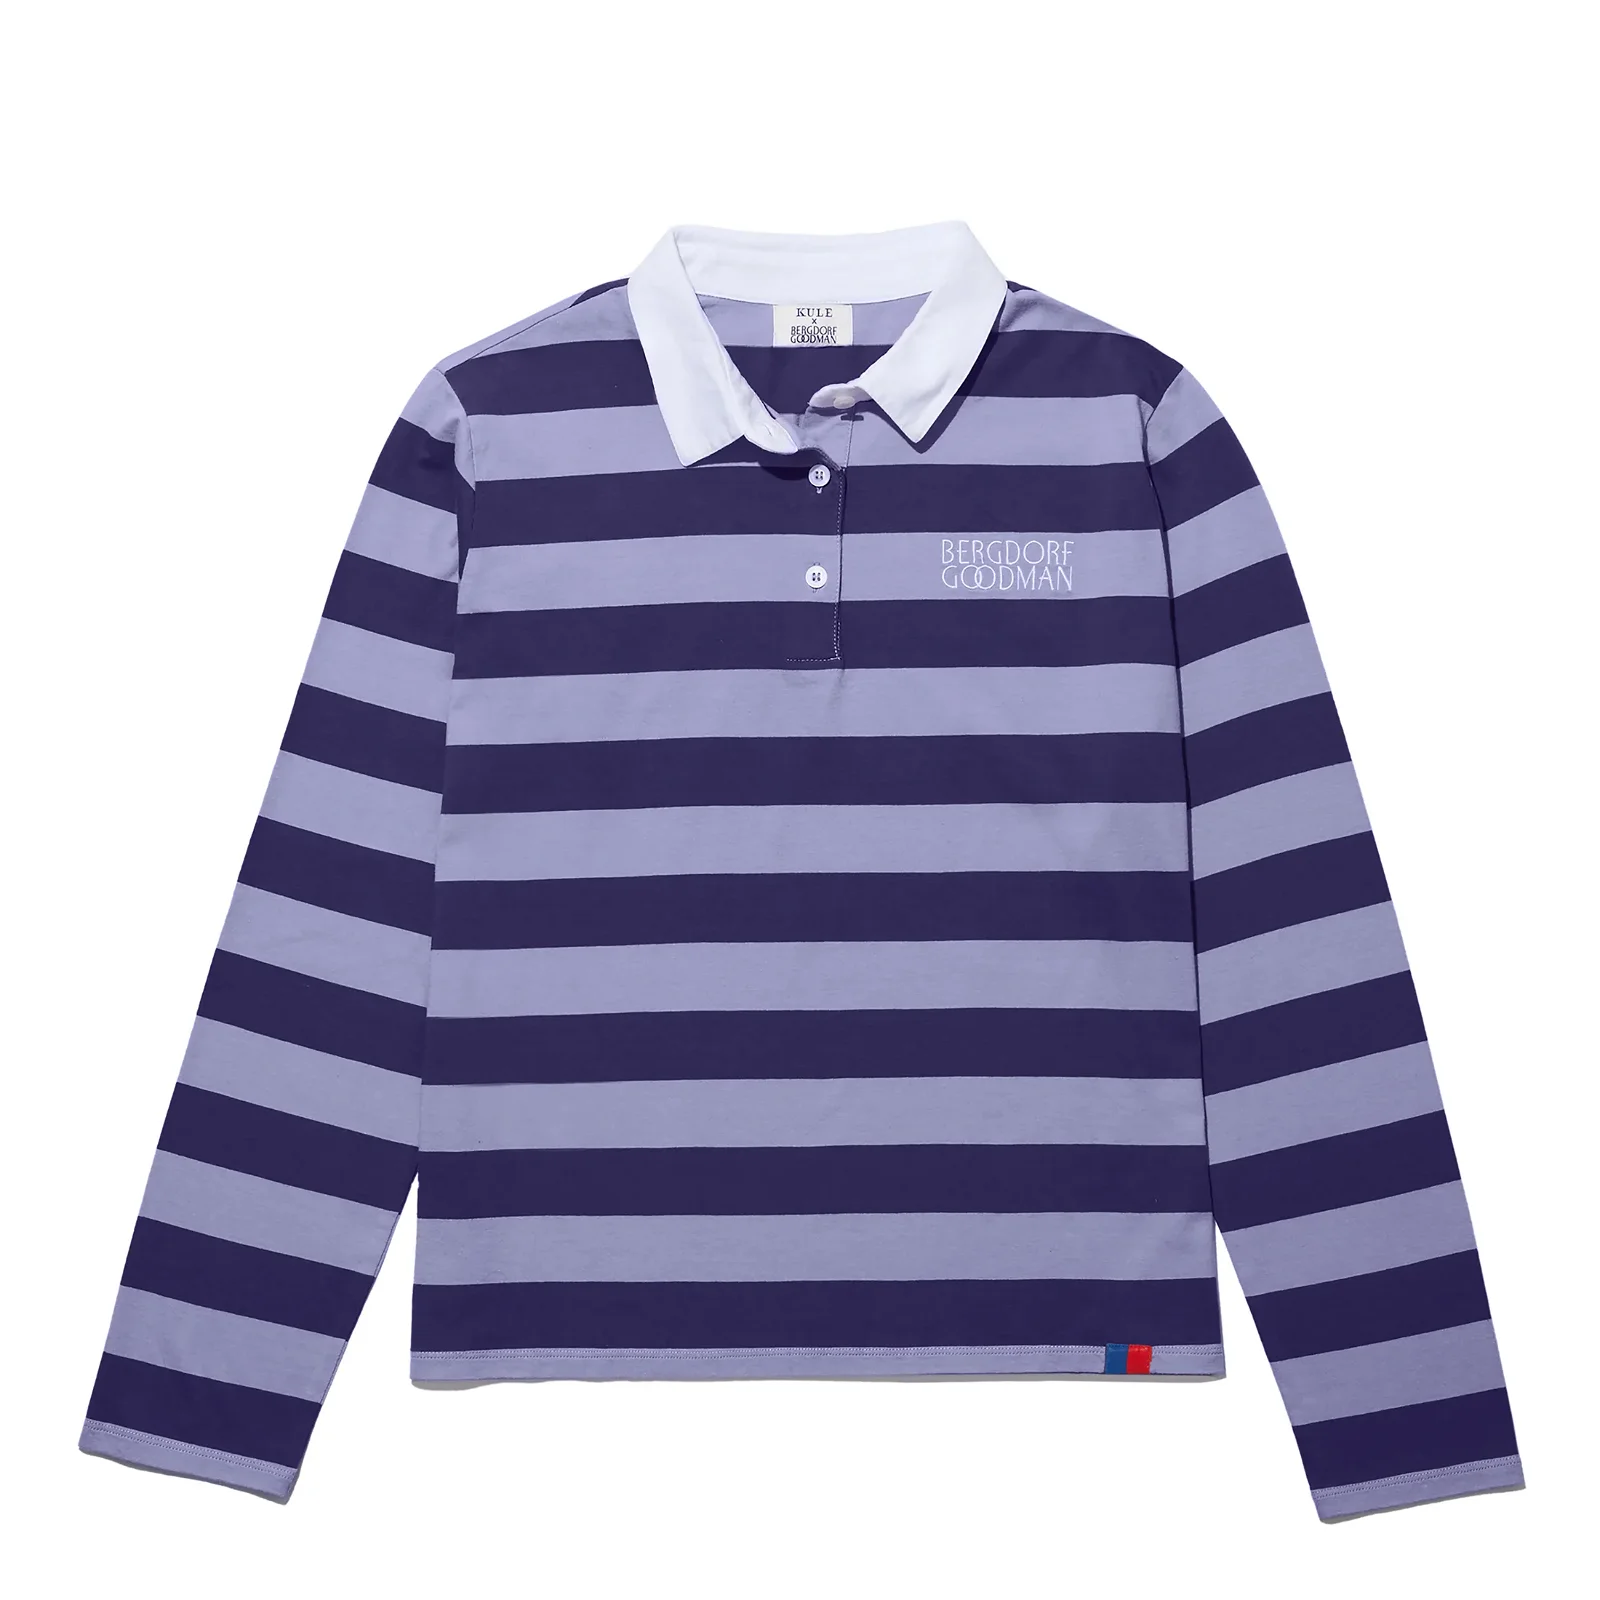 Image of The Women's Bergdorf Goodman Rugby - Lavender/Grape